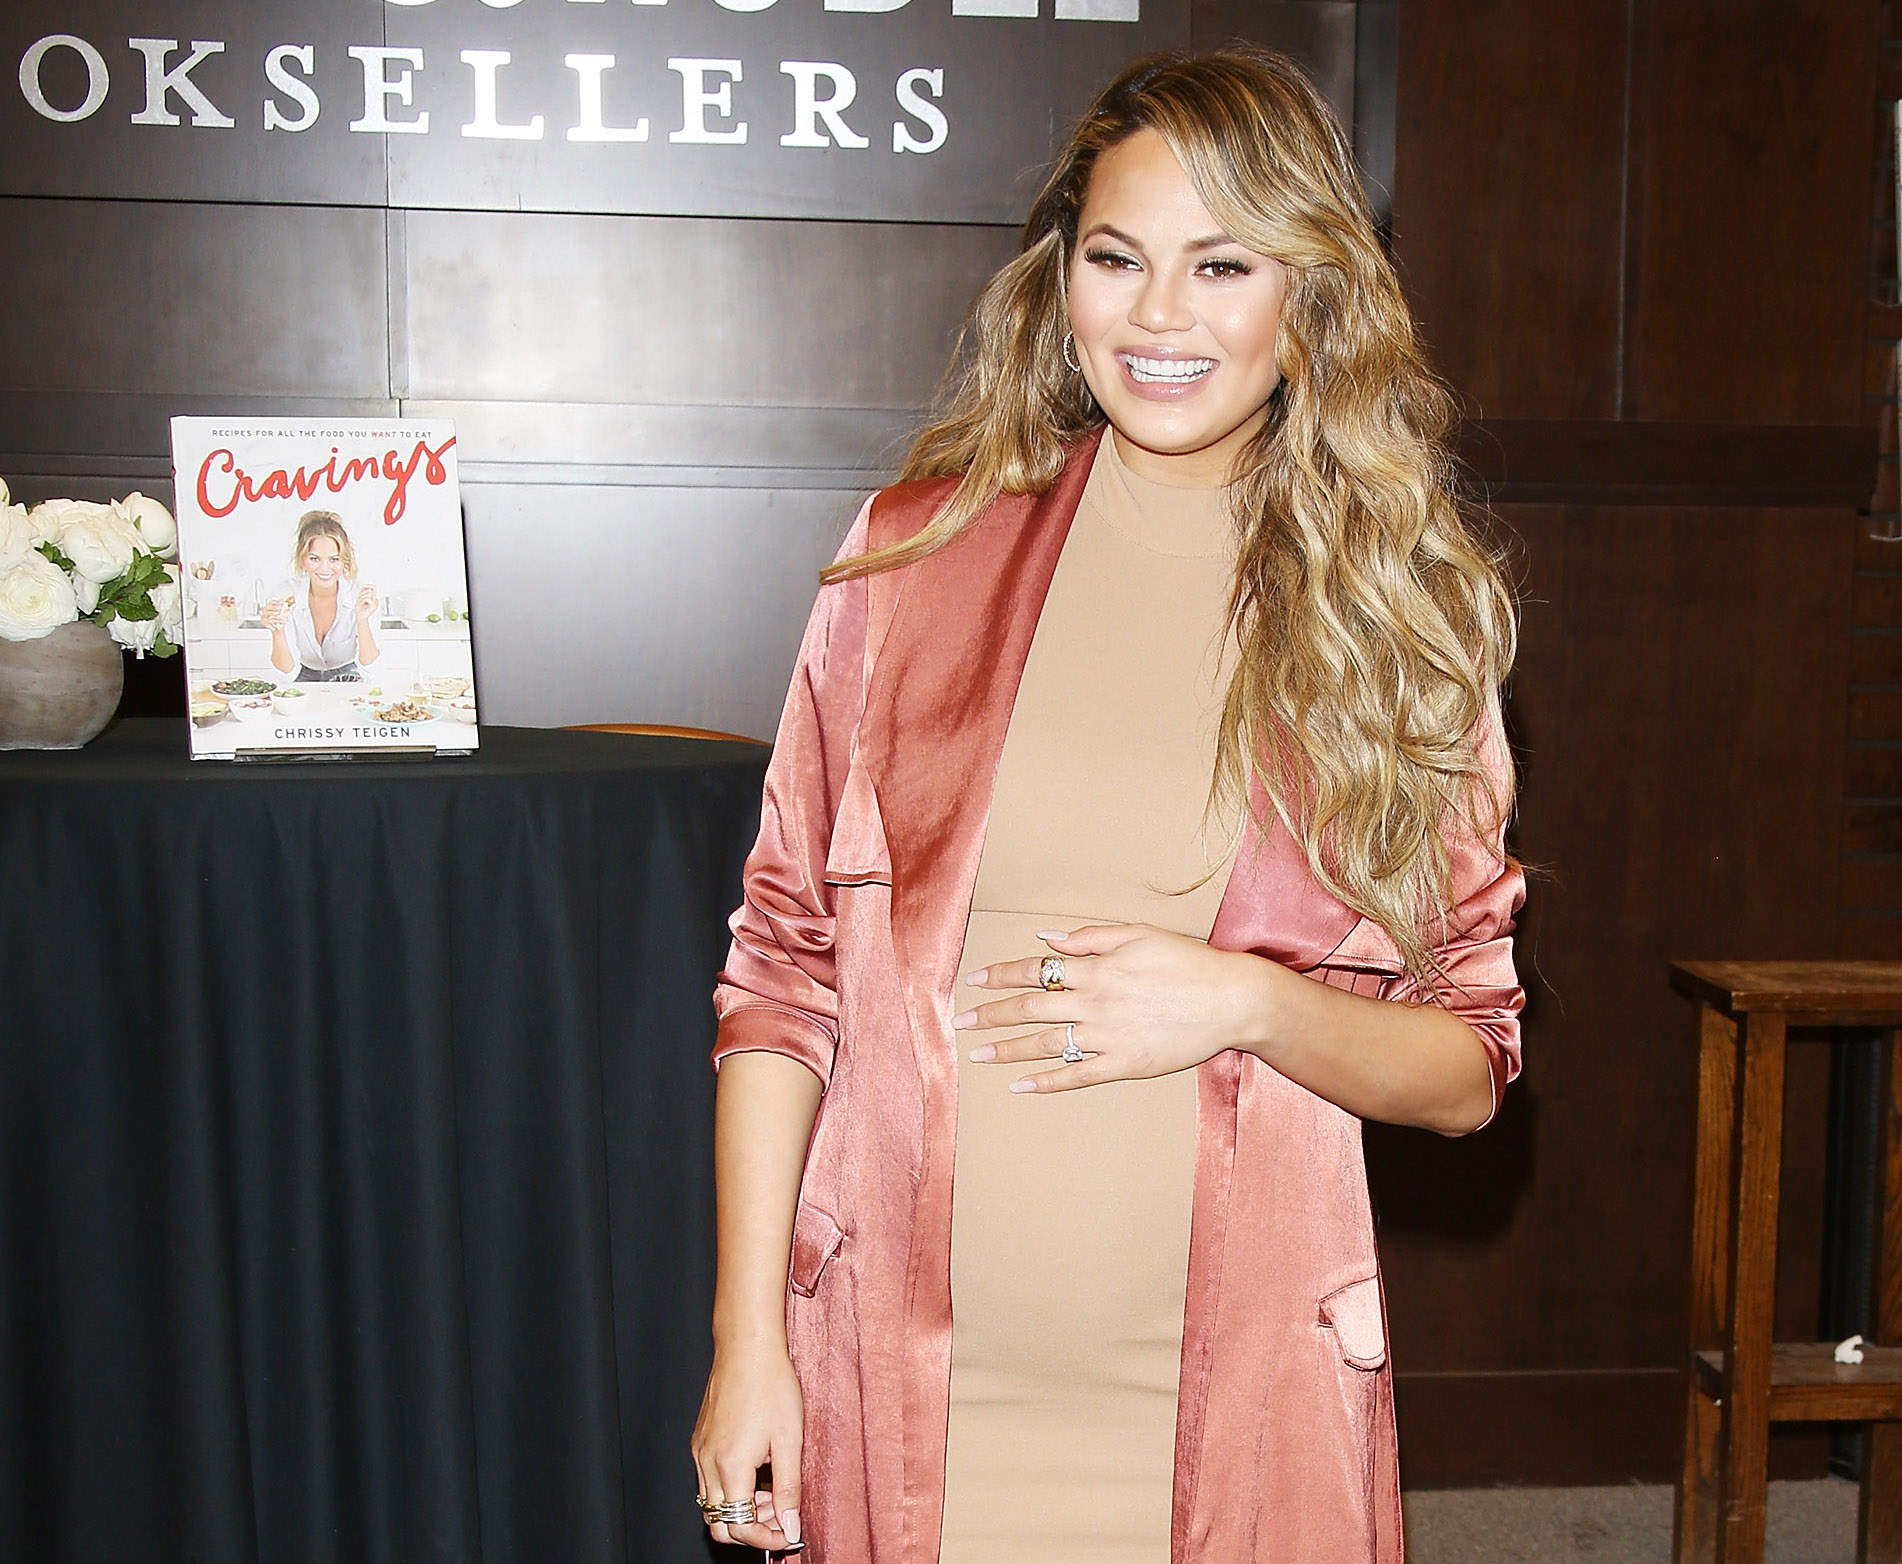 oops-chrissy-teigen-accidentally-shares-her-personal-cell-with-the-entire-world-2